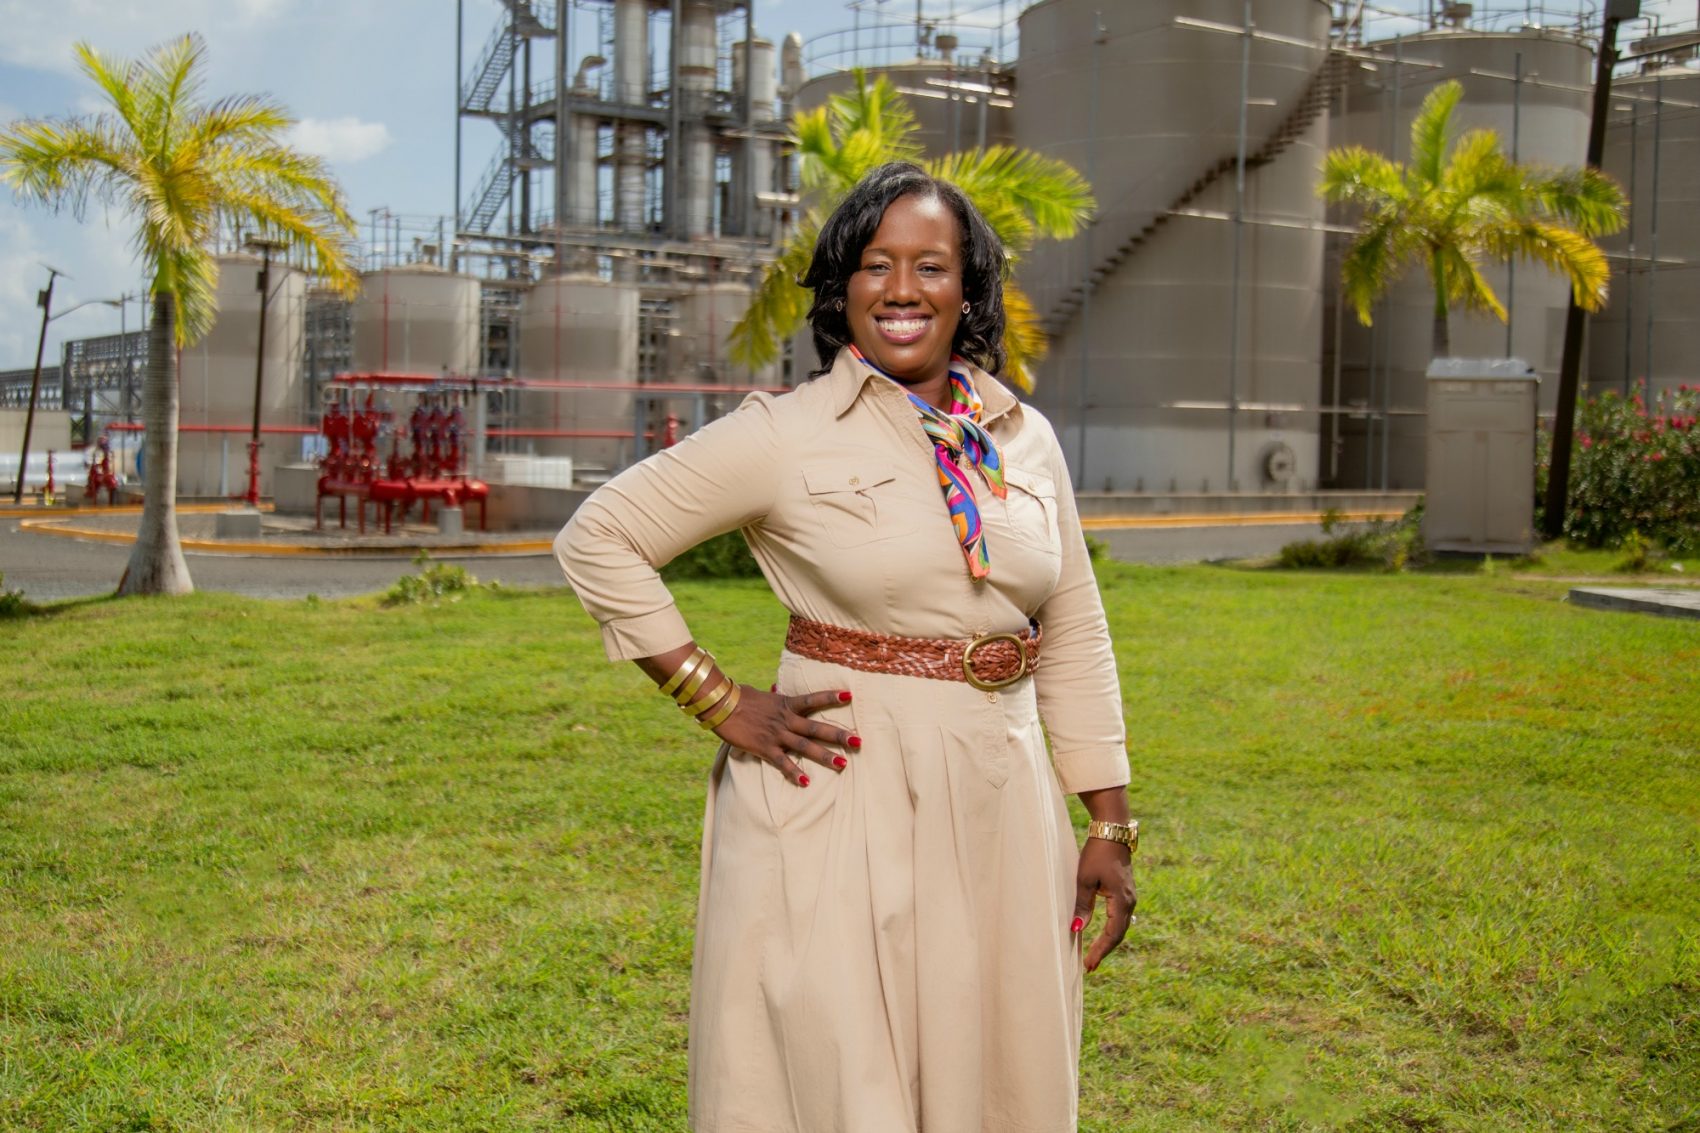 St. Croix Native Becomes Diageo USVI's Vice President of Operations